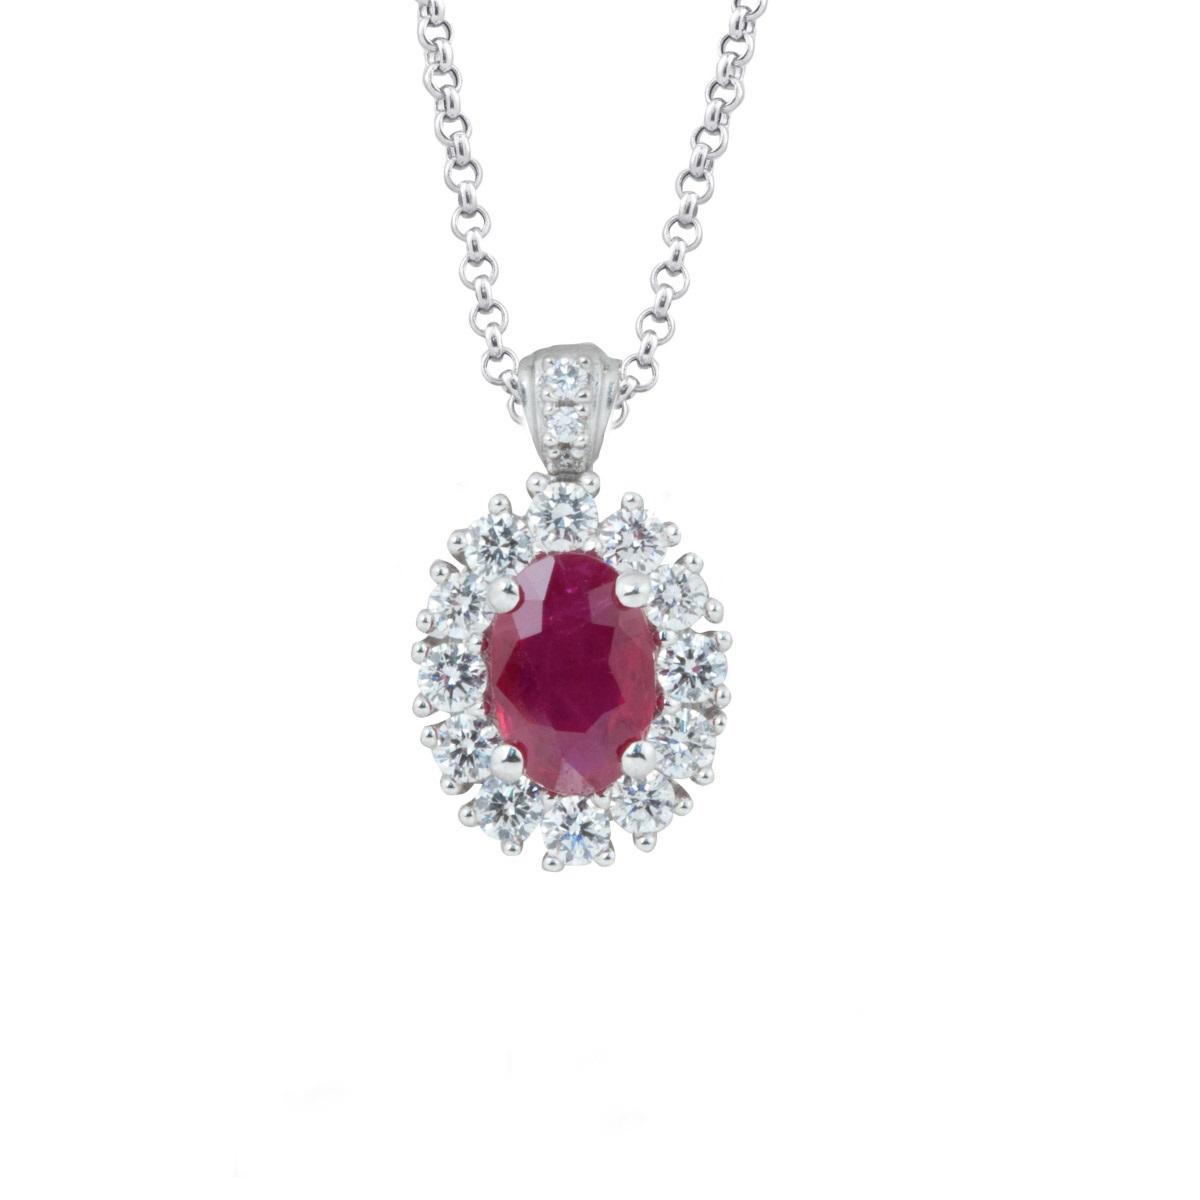 18kt white gold necklace with diamonds and central precious stone - CD490